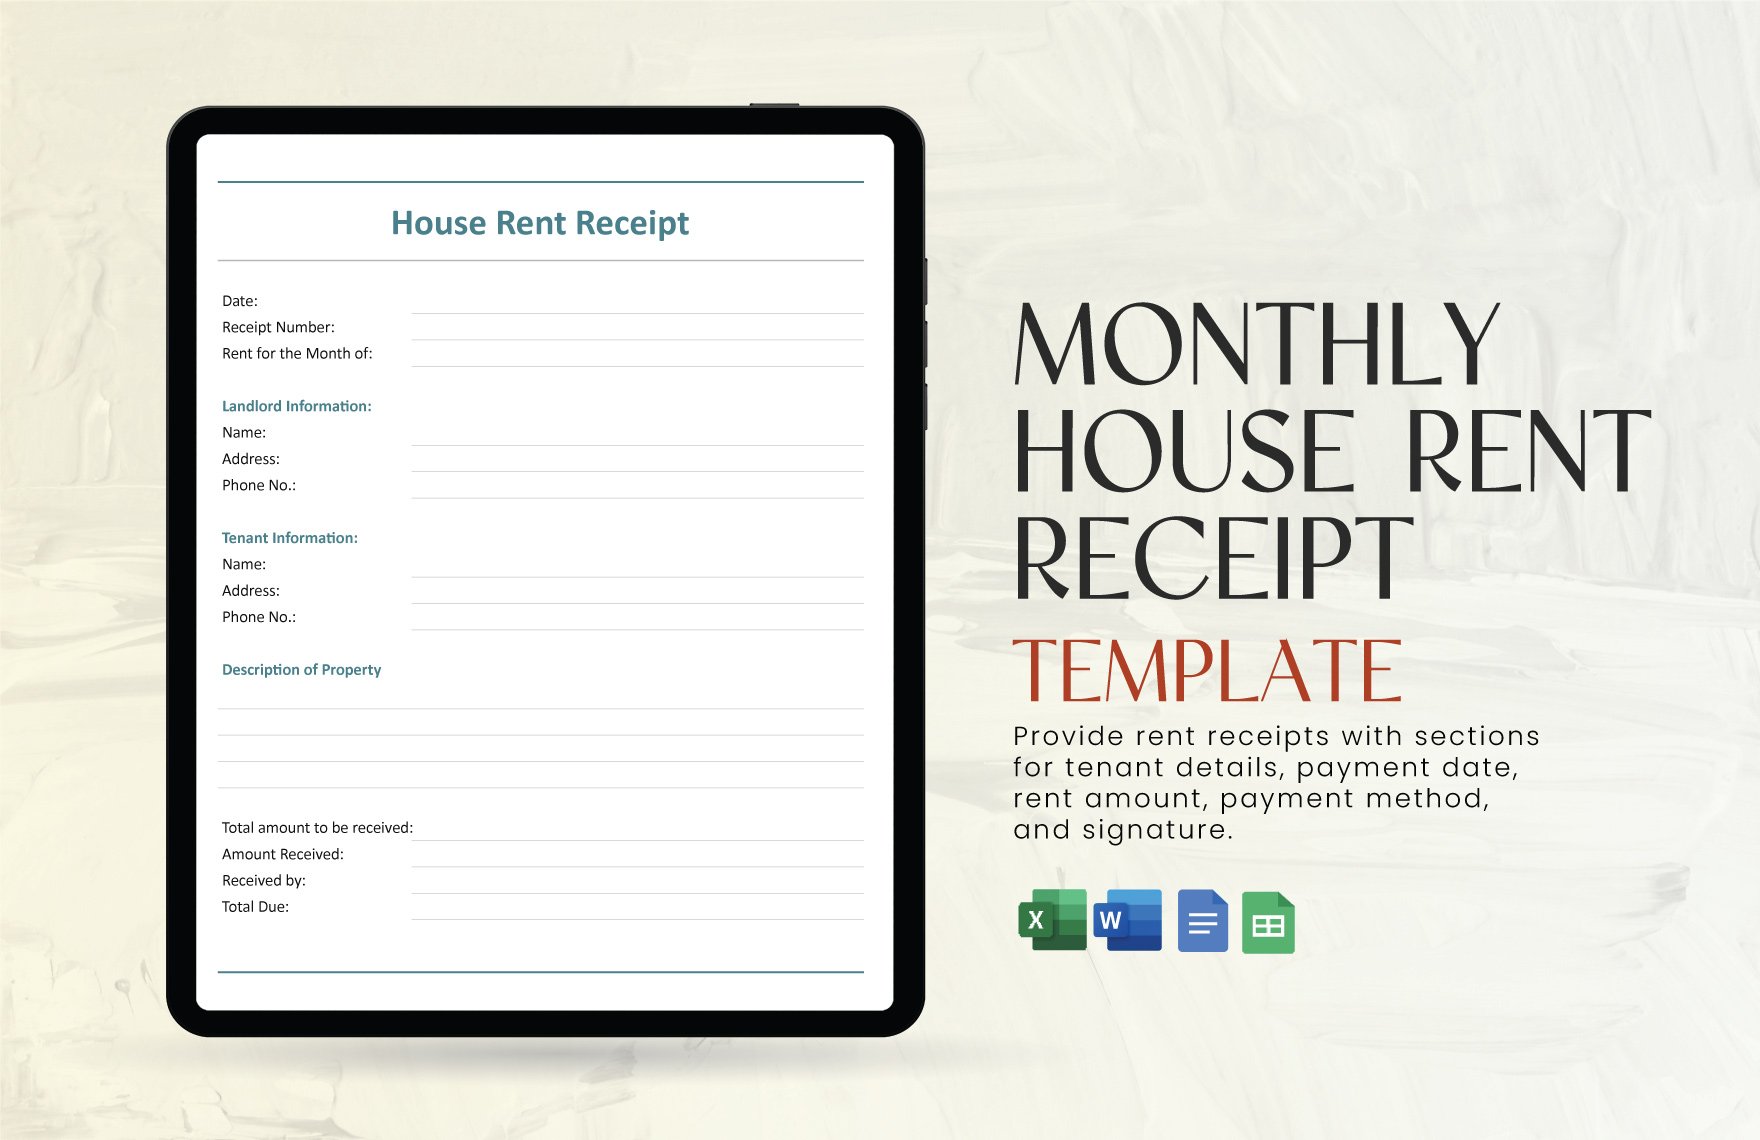 Monthly House Rent Receipt Template in Word, Google Docs, Excel, Google Sheets